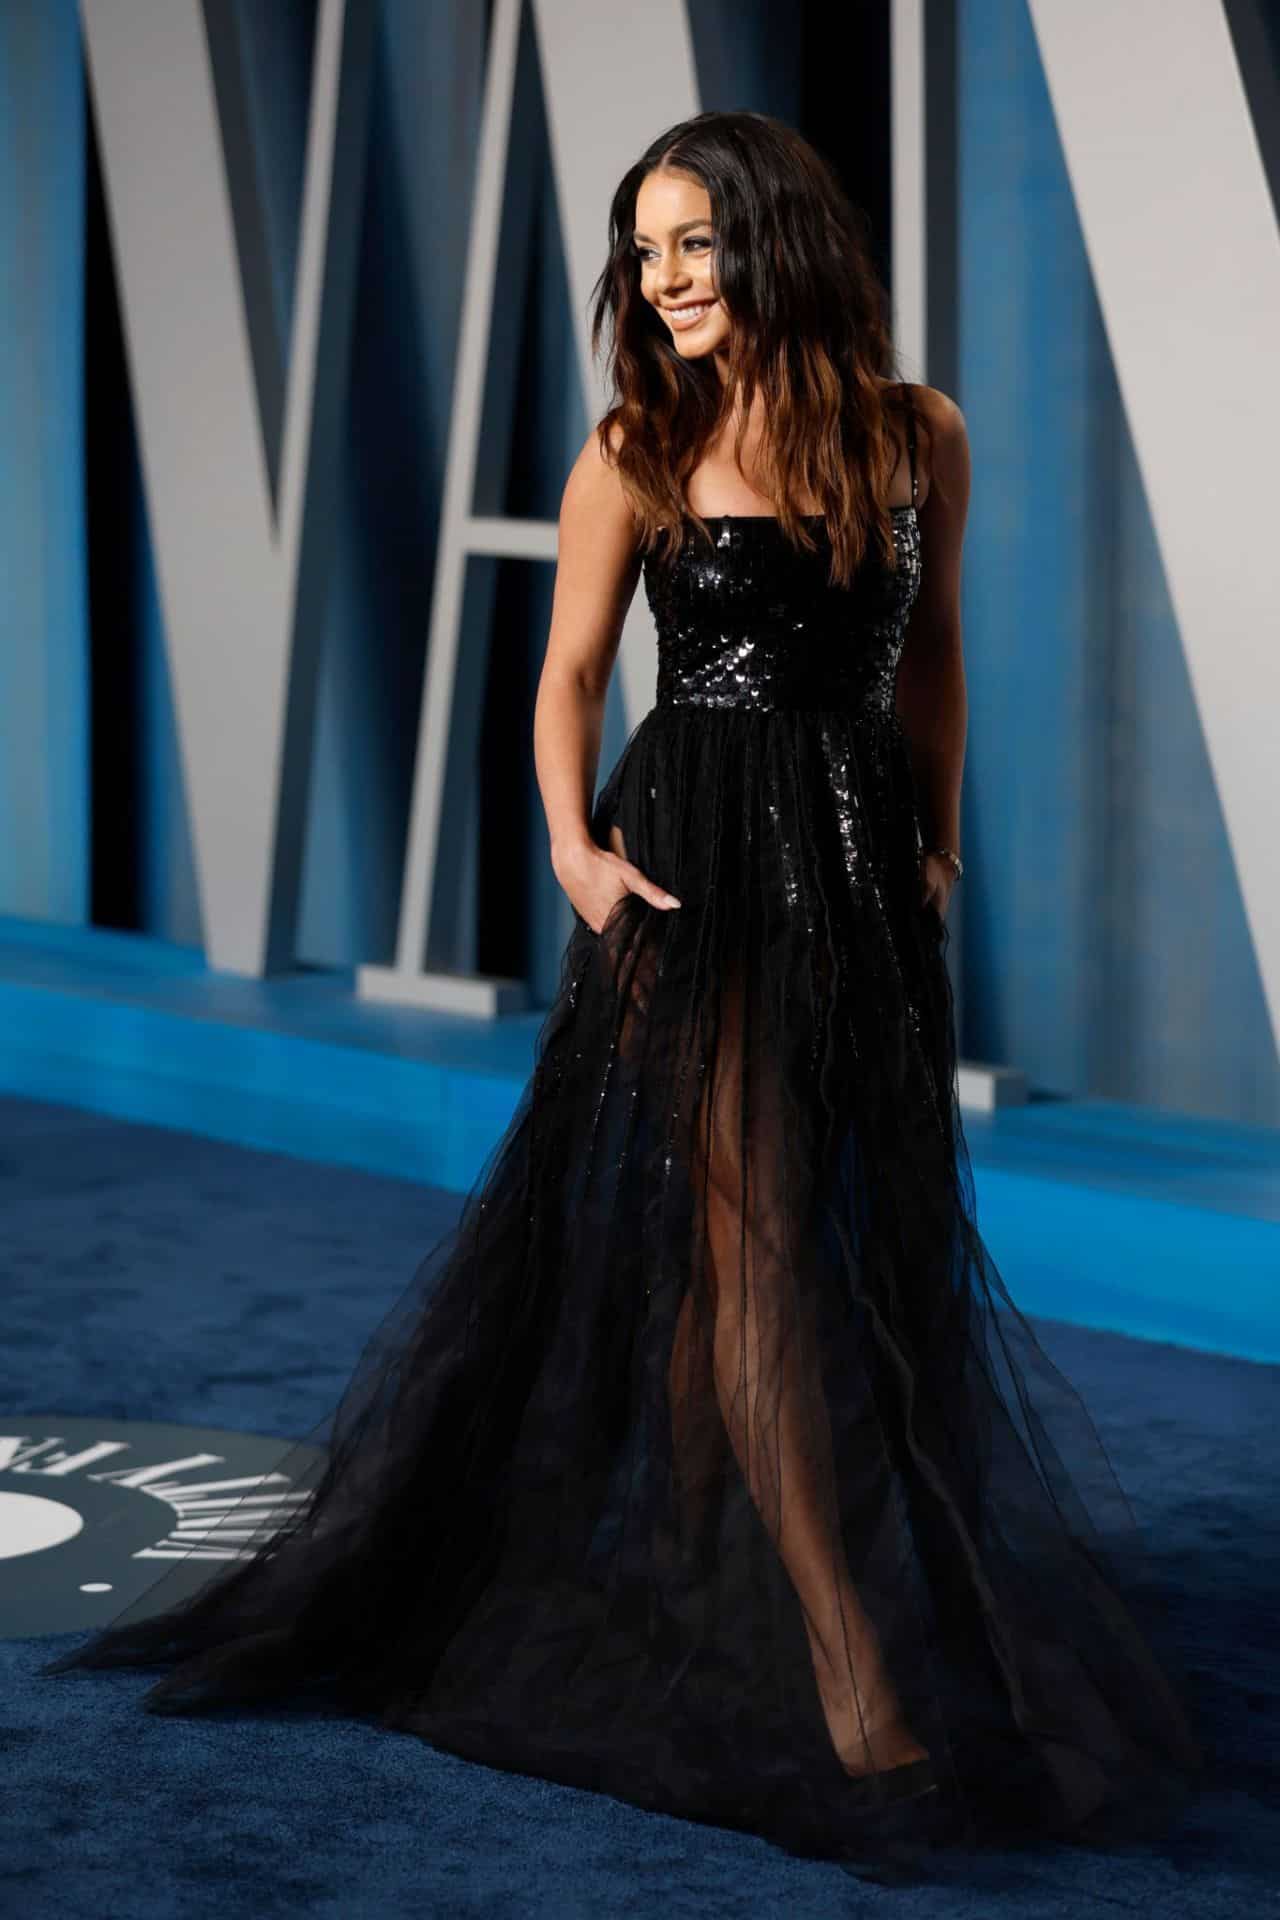 Vanessa Hudgens Looked Glorious in a Sheer Dress at the 2022 Oscars